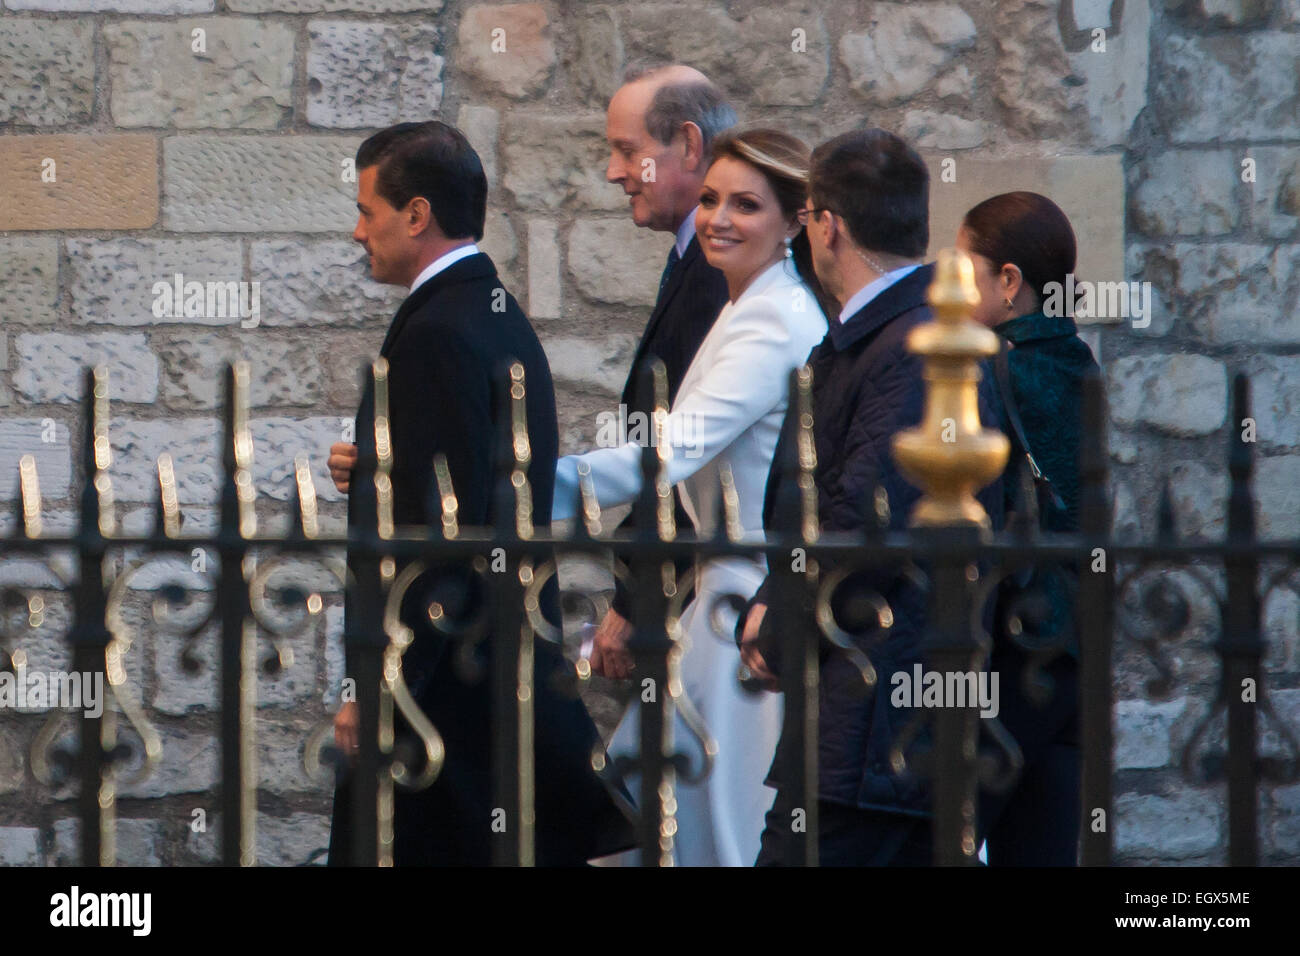 Westminster Abbey, London, March 3rd 2015. Mexican President Enrique Pano Nieto on a state visit to the United Kingdom, arrives at Westminster Abbey with his soap opera actress wife Angelica Rivera to lay a wreath at the Tomb of the Unknown Soldier. Credit:  Paul Davey/Alamy Live News Stock Photo